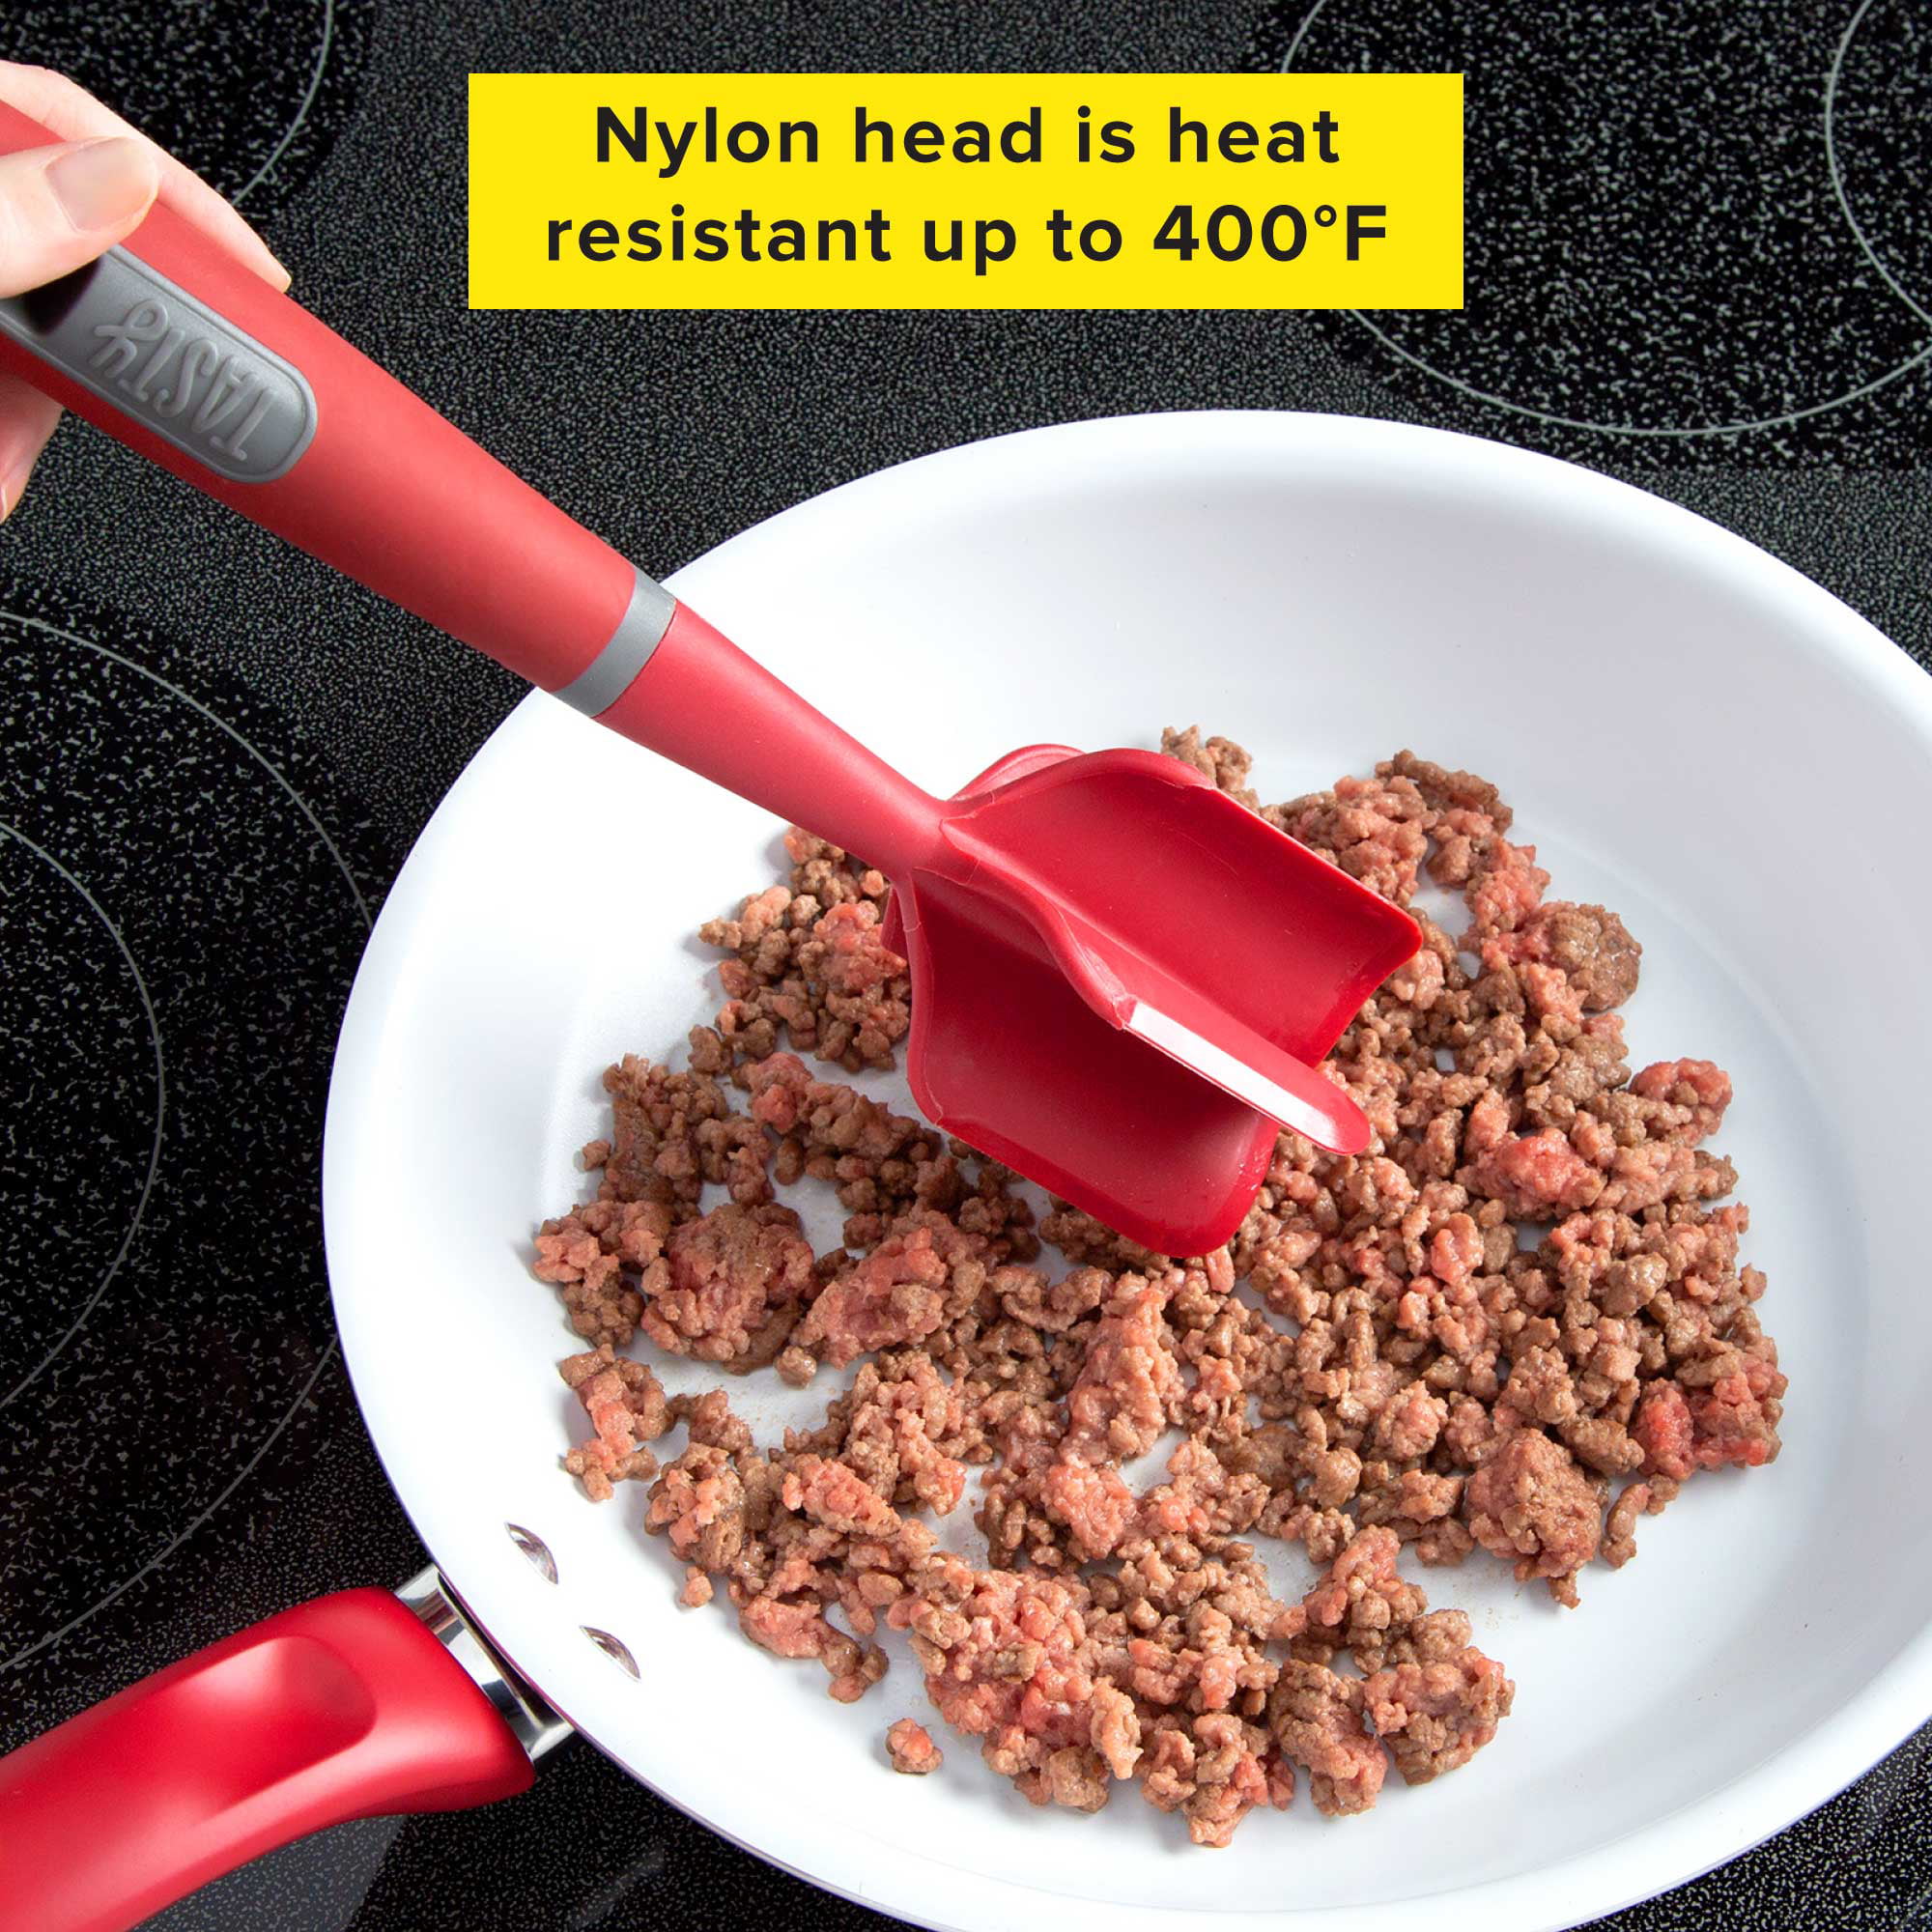 Kitchen Meat Chopper Ground Beef Masher Utensil Heat Resistant Non-Stick -  Coupon Codes, Promo Codes, Daily Deals, Save Money Today